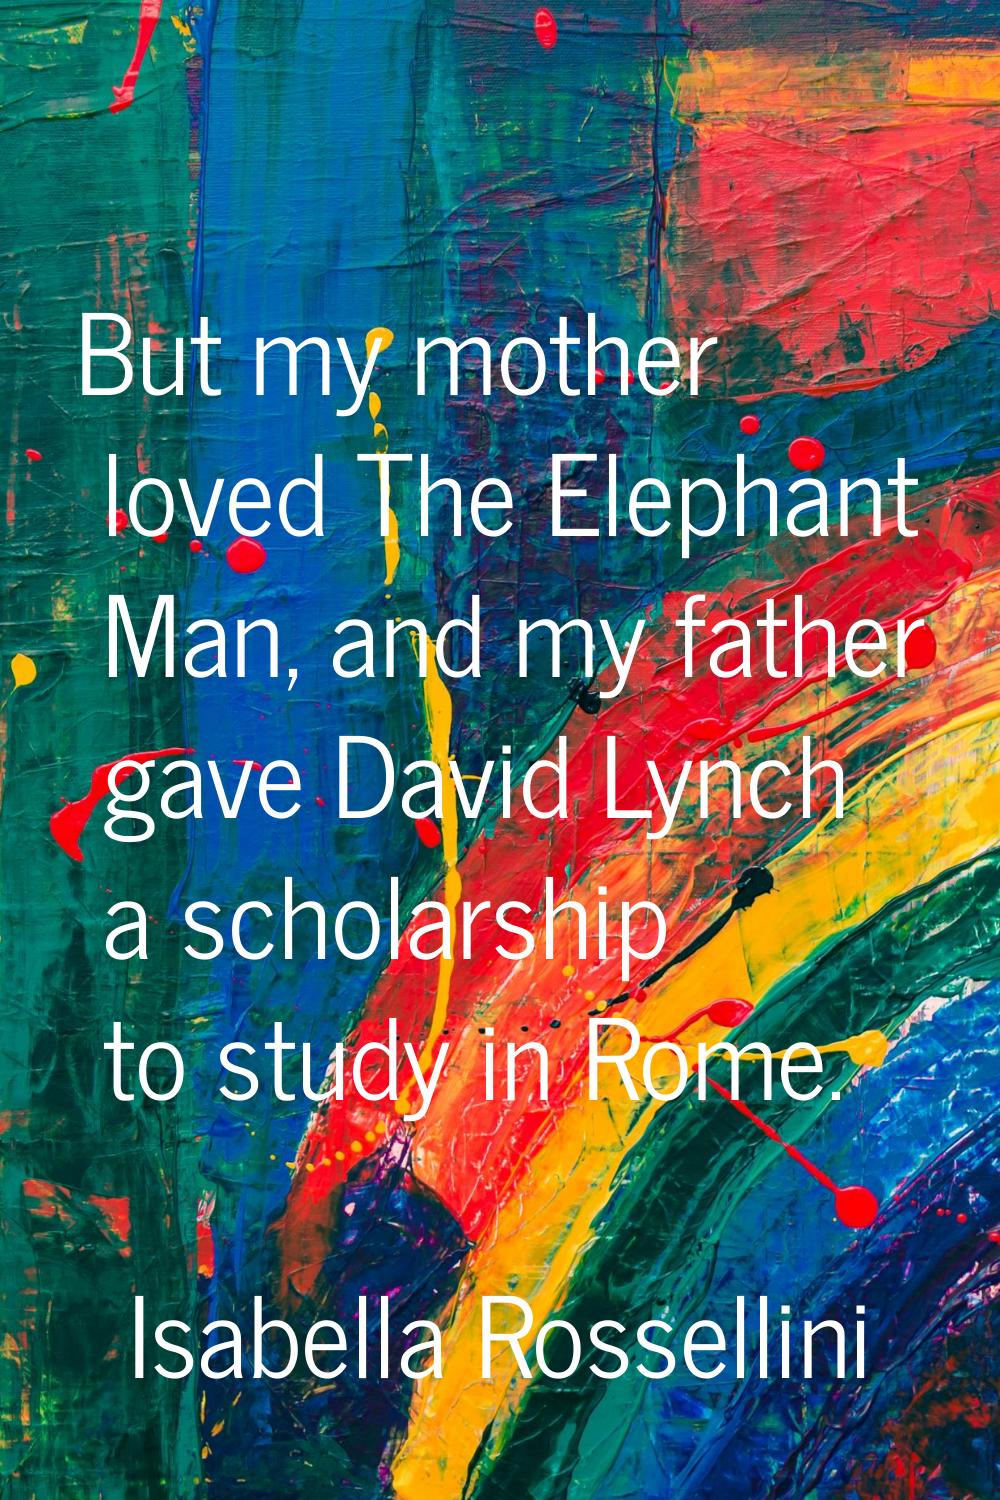 But my mother loved The Elephant Man, and my father gave David Lynch a scholarship to study in Rome